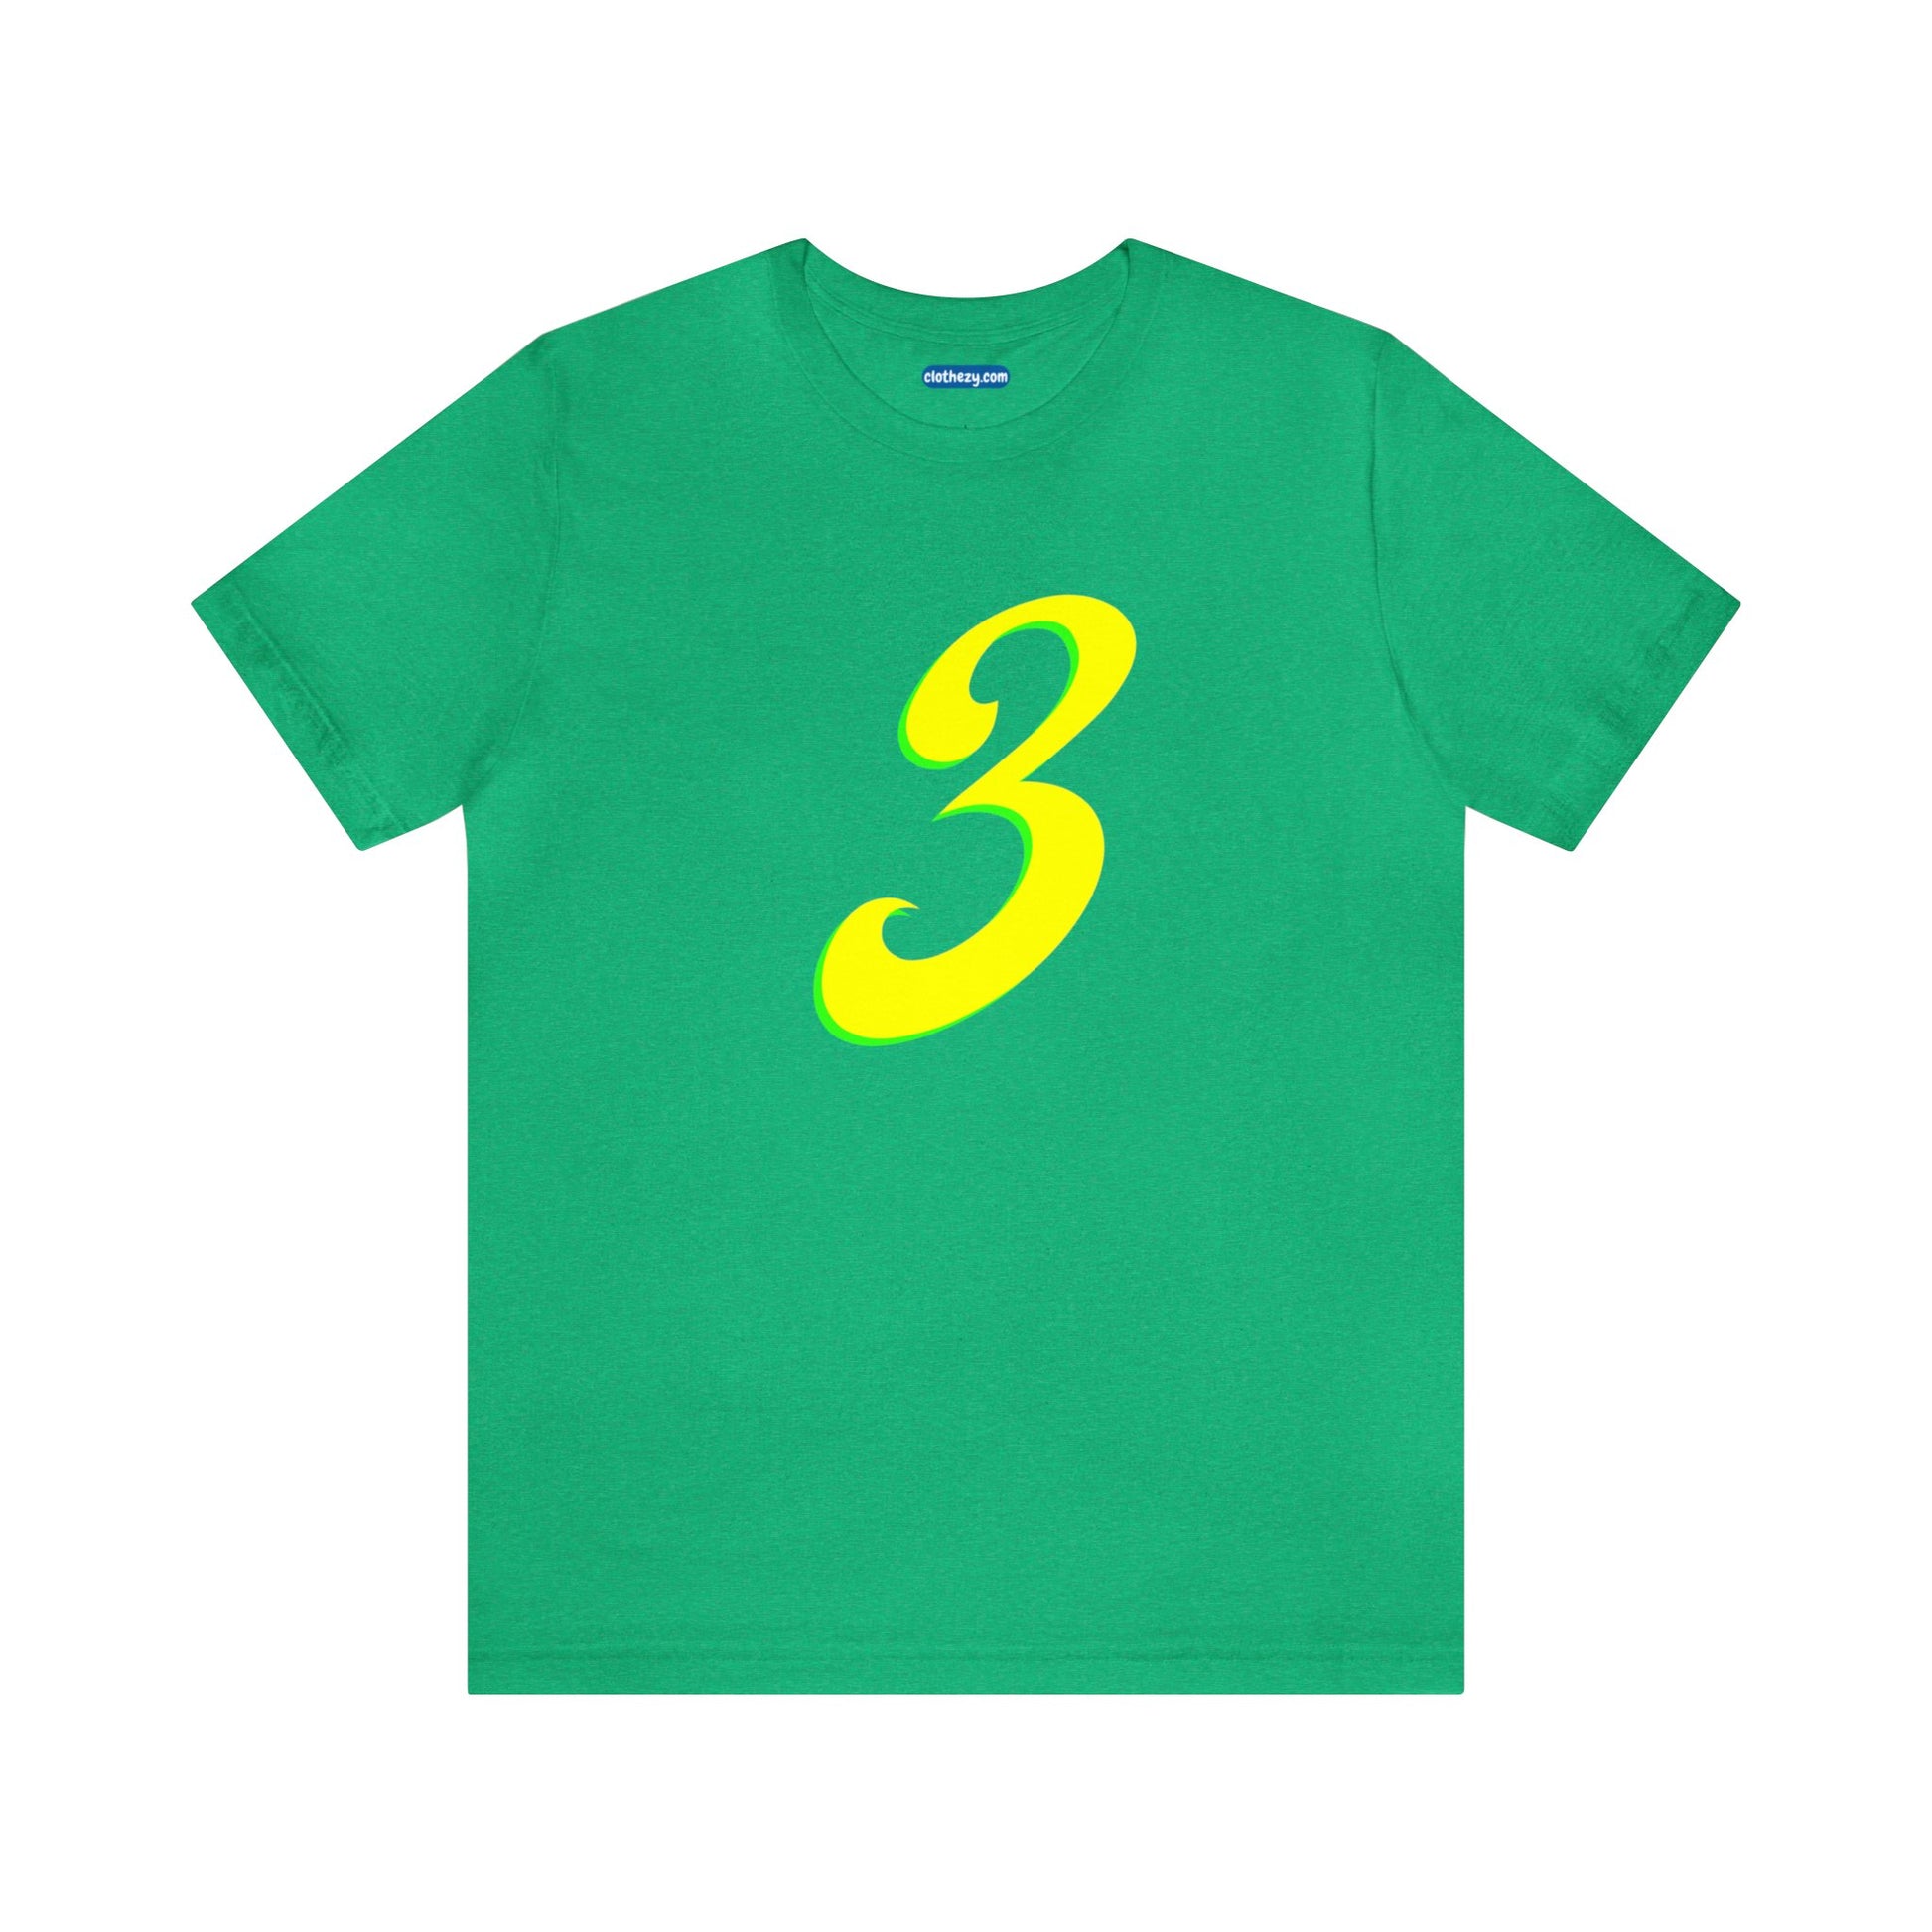 Number 3 Design - Soft Cotton Tee for birthdays and celebrations, Gift for friends and family, Multiple Options by clothezy.com in Royal Blue Heather Size Small - Buy Now